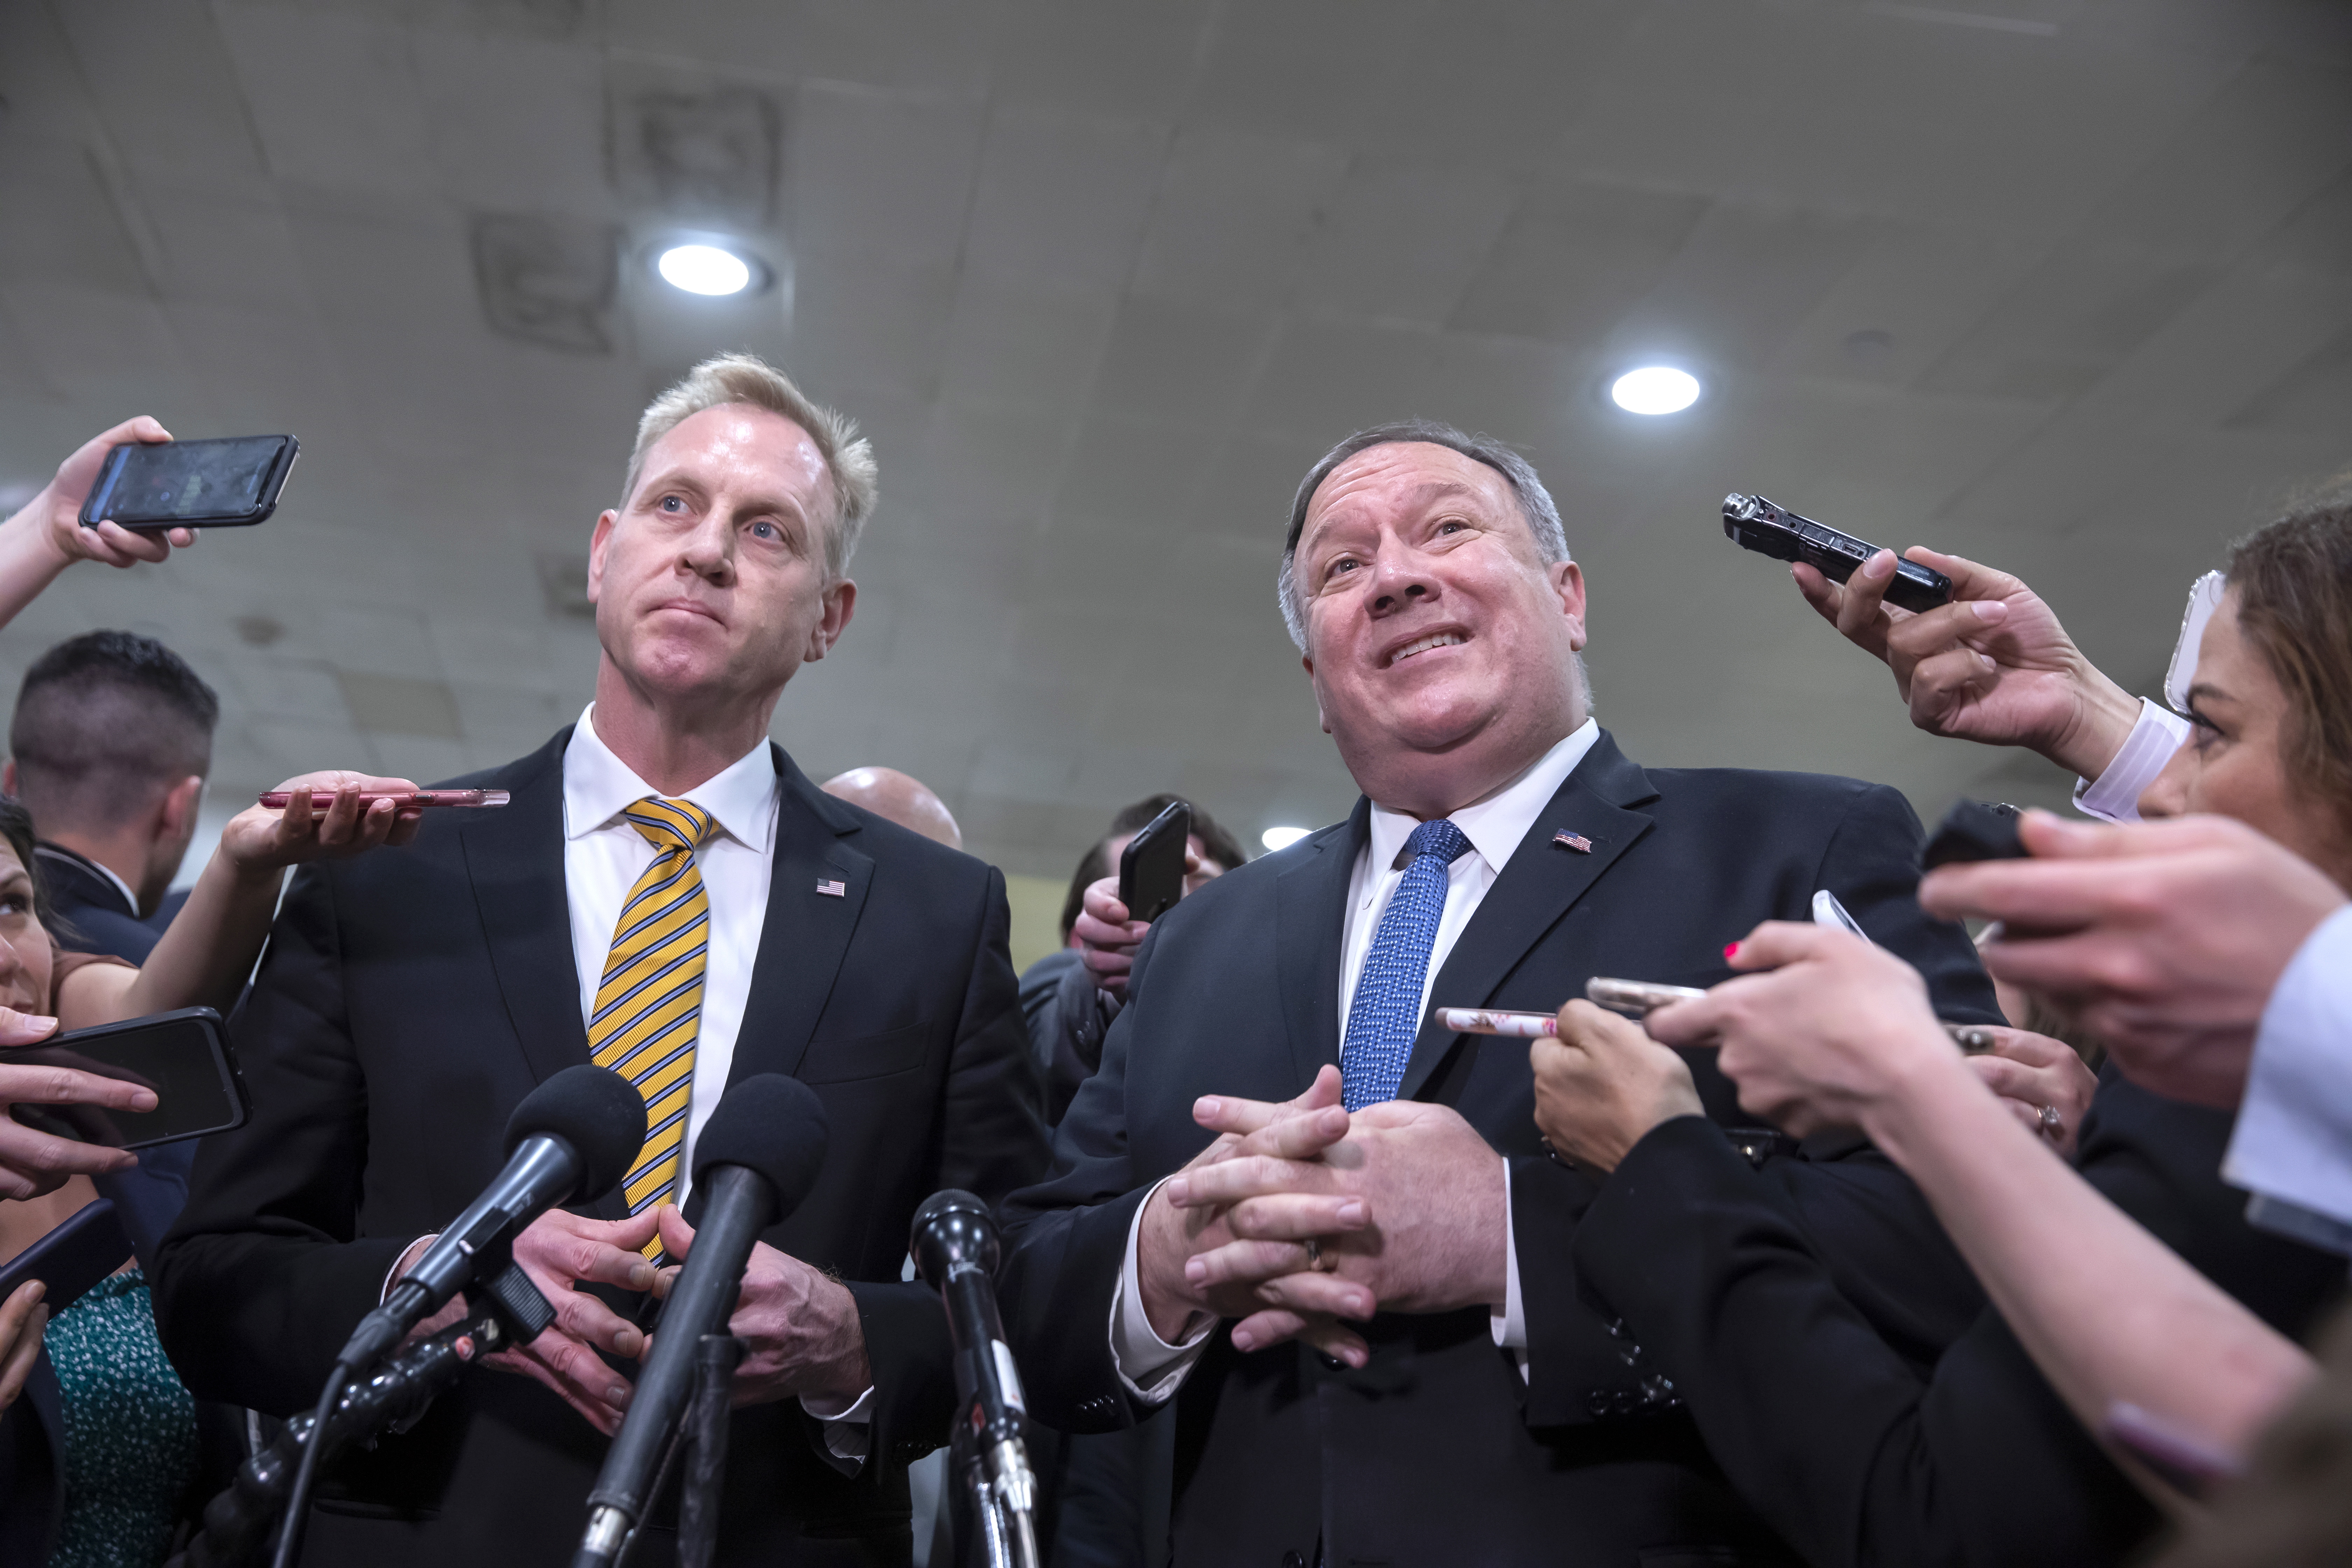 epa07590385 US Secretary of State Mike Pompeo (R) and Acting Defense Secretary Patrick Shanahan (L) speak to the new media after giving a classified intelligence briefings on Iran to members Congress at the Capitol in Washington, DC, USA, 21 May 2019. The administration of President Trump briefed Congress on intelligence that has prompted the US military build up against reported Iranian threats in the Persian Gulf region.  EPA/ERIK S. LESSER